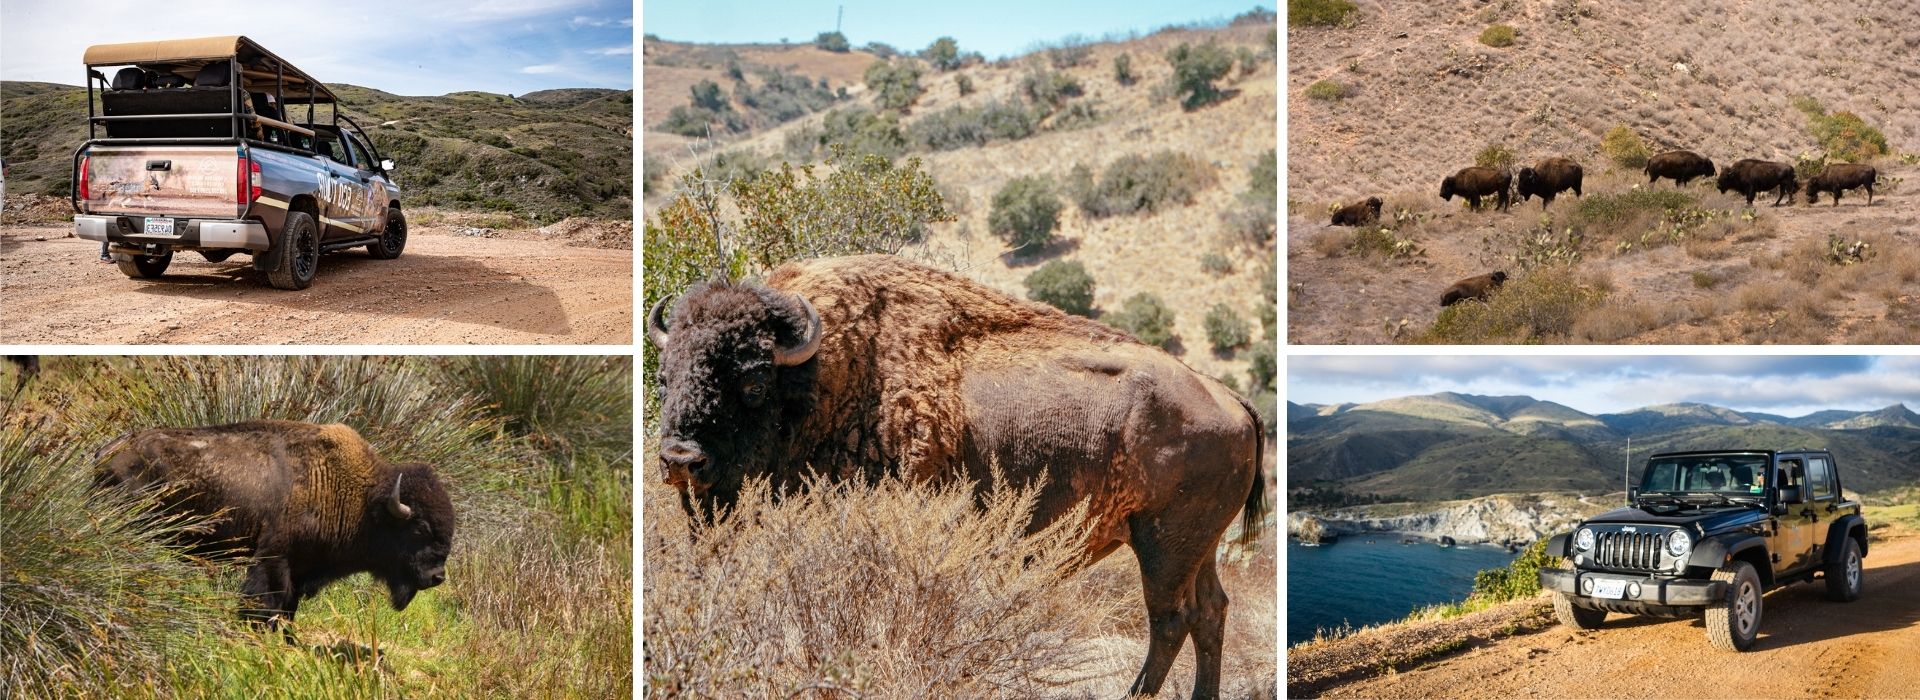 A collage of five photos. Starting from top left to right: Catalina Island Conservancy eco-tour truck, bison facing camera, small herd of bison, side profile of a bison, and a jeep tour.